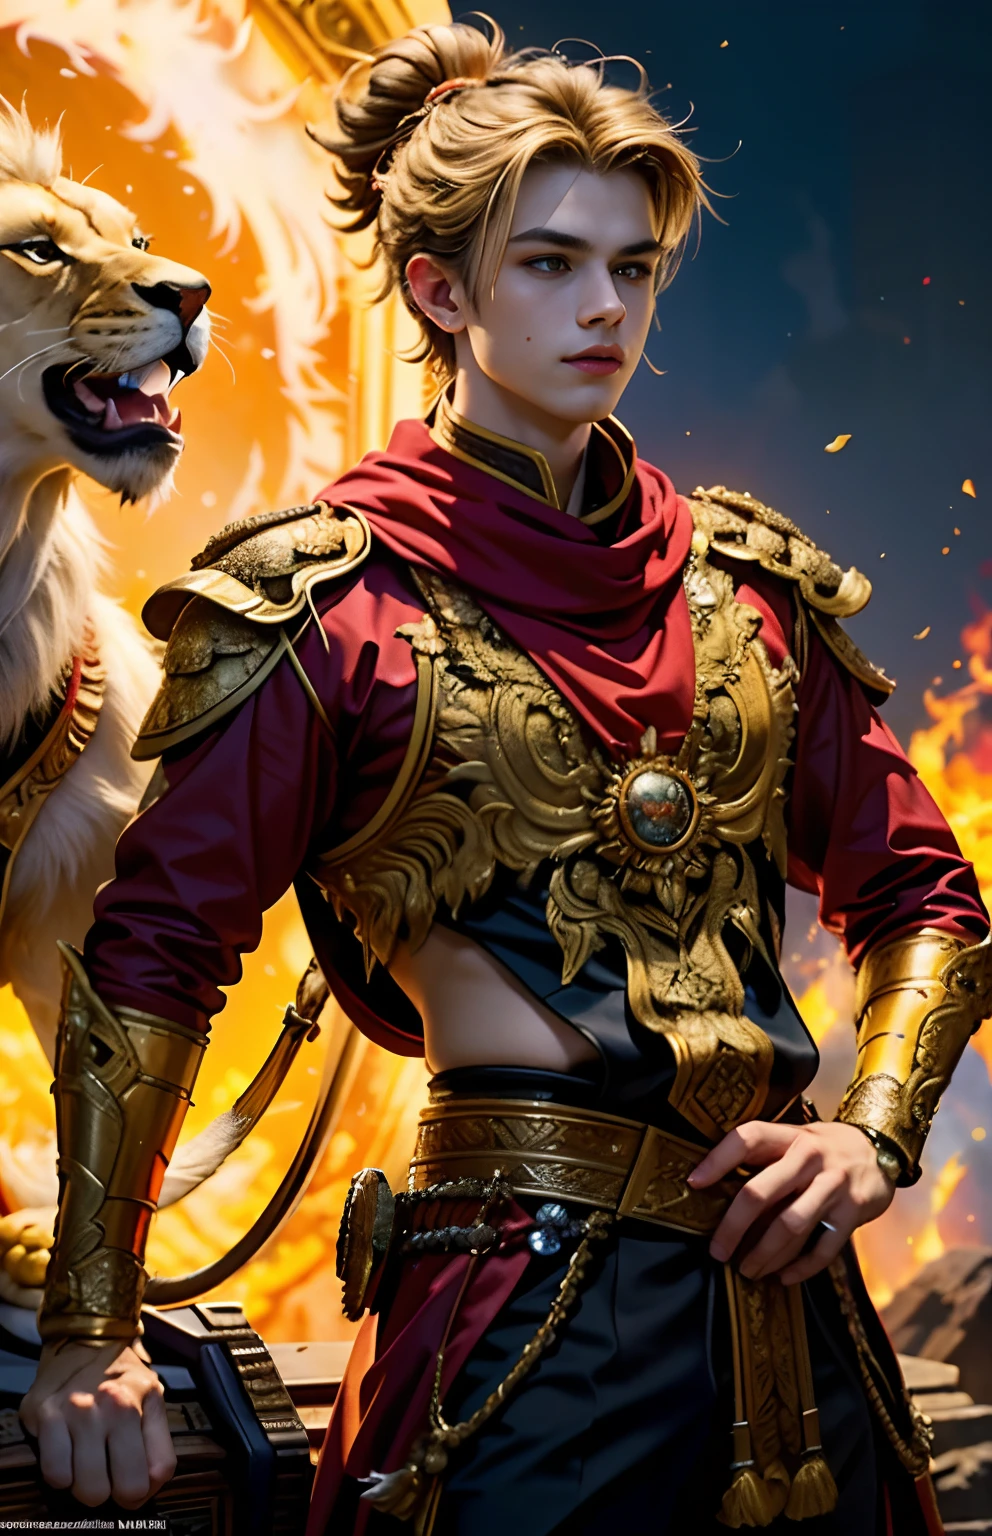 (1male) , The young man of the sun god sitting on the back of a lion looks interesting..................((Standing next to a lion)).,,Against the backdrop of flames and sun. (Updo crimson:1.2),(Medium Full Shot) Wearing full body armor.........,slight smile, (Red inner leather jacket)(Dark Armor 1.1) And a red robe..........................,(Red long scarf) (capes:1.2) Royal style family (embroidery:0.5) (Medium length hairstyles, blonde)., skinny (Gorket Luckcart Poldron :1.3), (Cow symbol on armor), (masterpiece:1.2) (illustration:1.1) (bestquality:1.2) (Detailed) (intricate) (10) (HDR) (wallpaper) (Cinematic lighting) (crisp focus), Linewichit Style